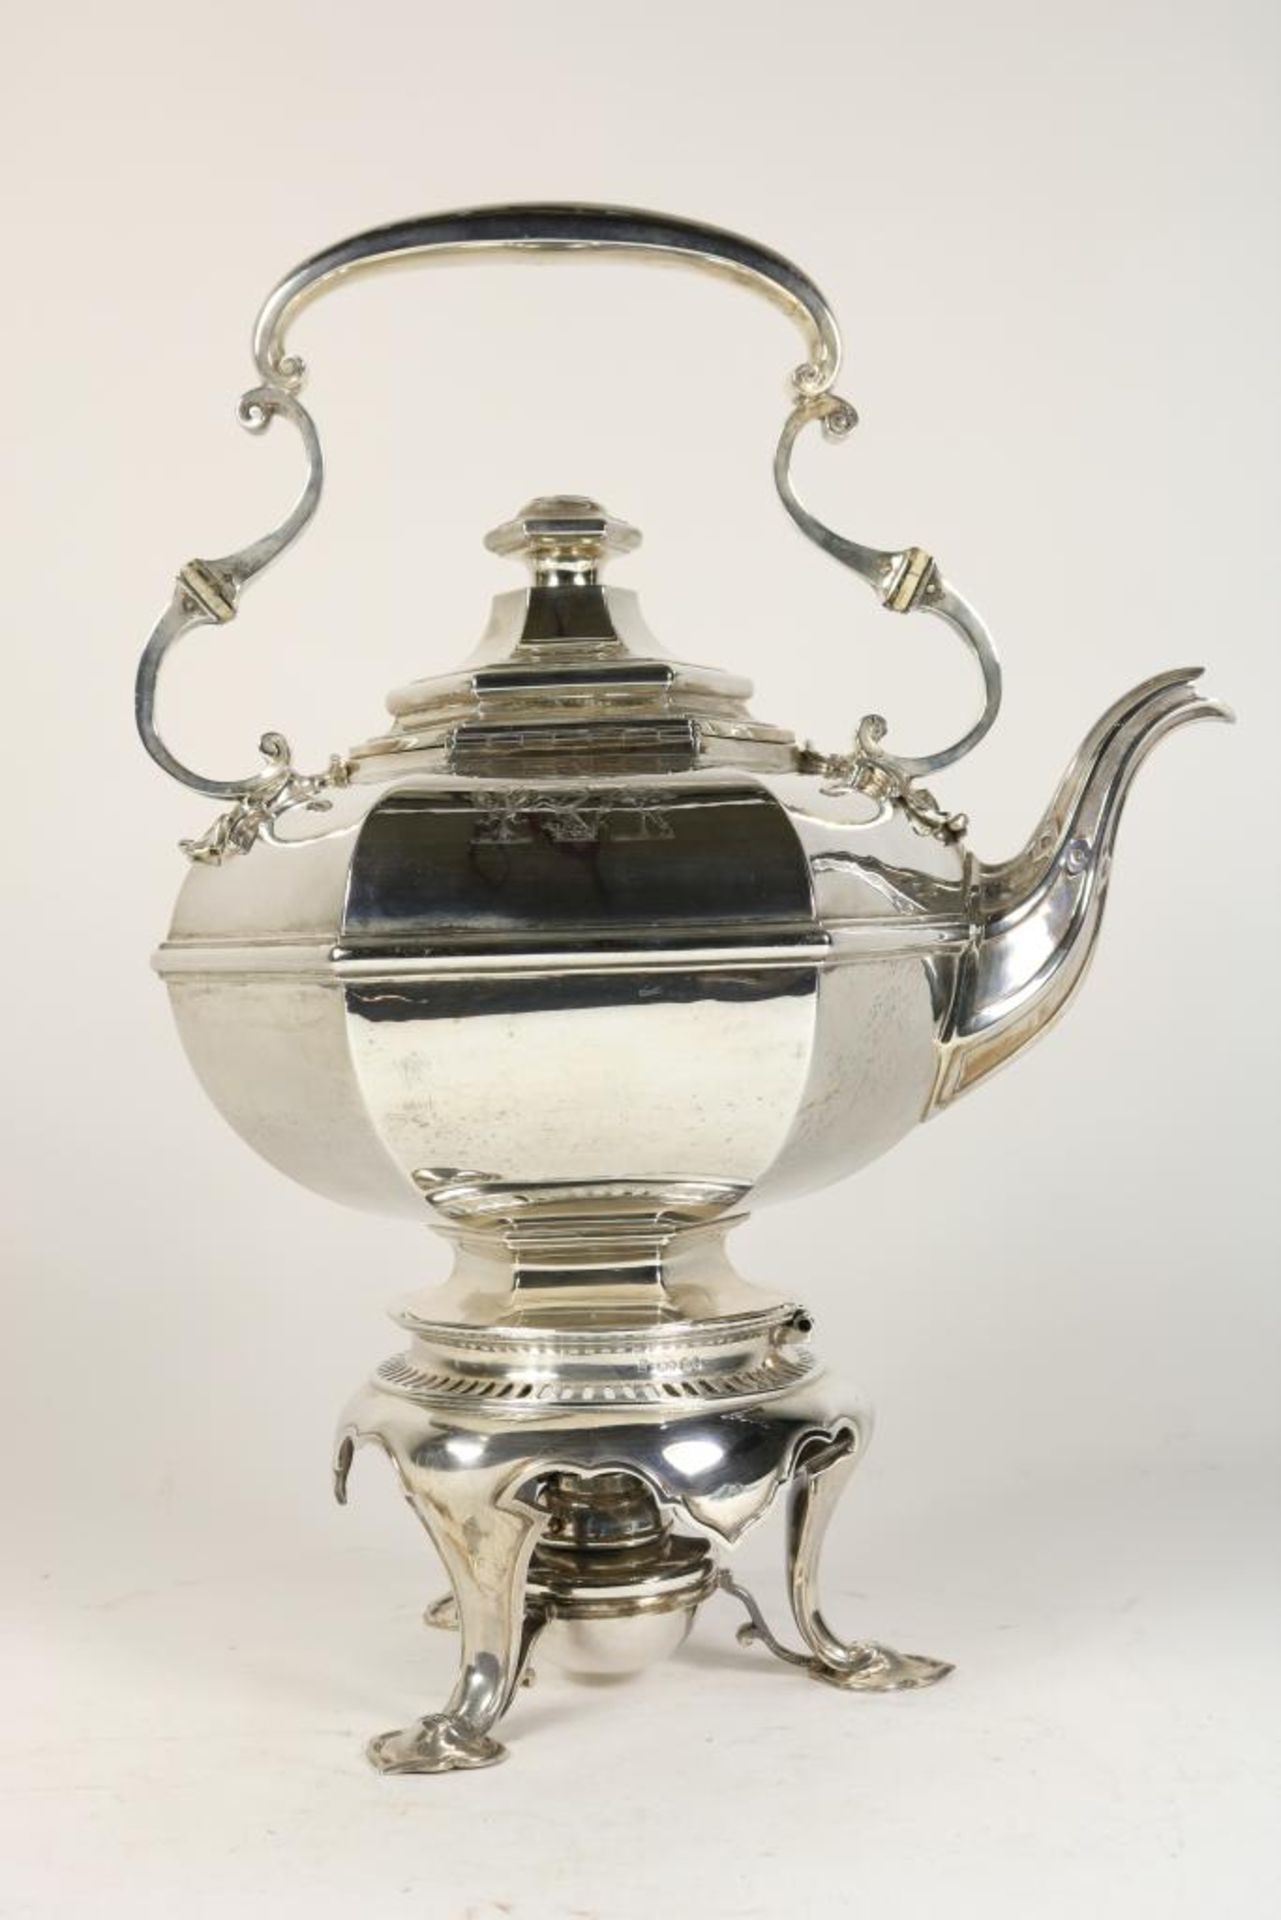 A hexagonal silver water kettle or bouilloire and burner Kettle: London, mm J.S. Hunt, retailers